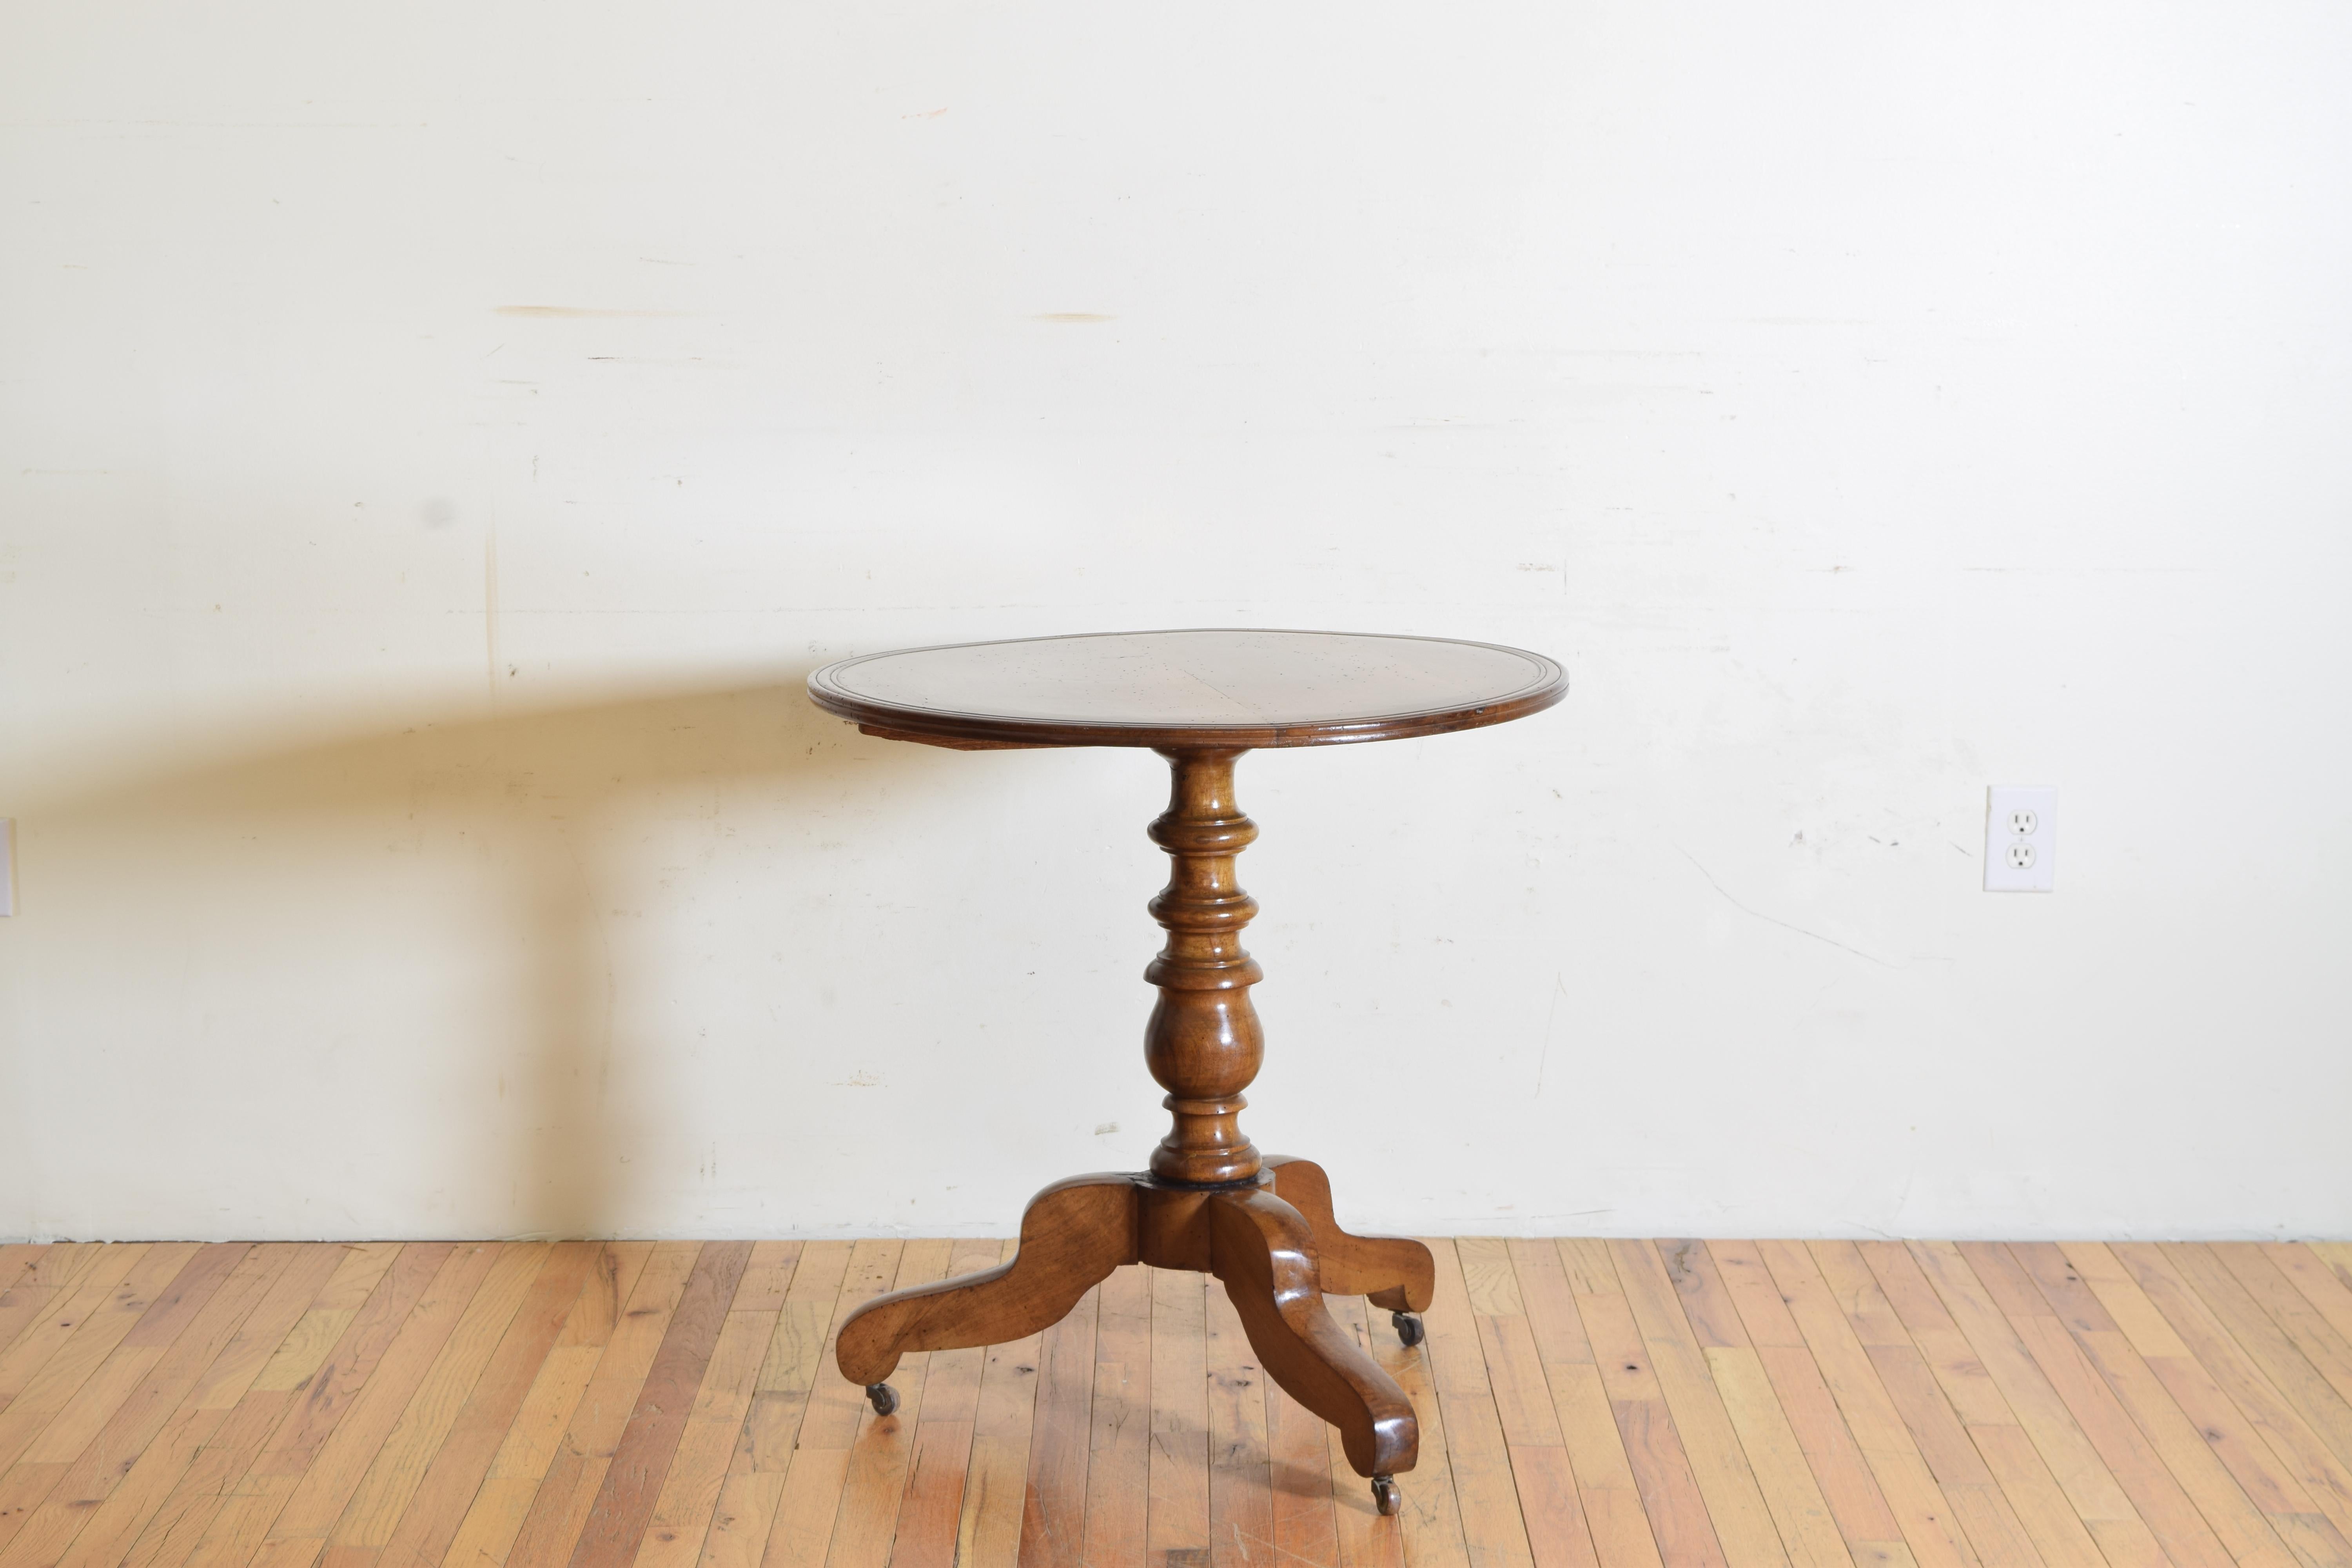 The round top with galleried edge resting atop a turned standard with removable tilt controlling hand shaped pin supported by a tripartite base with antique brass casters.